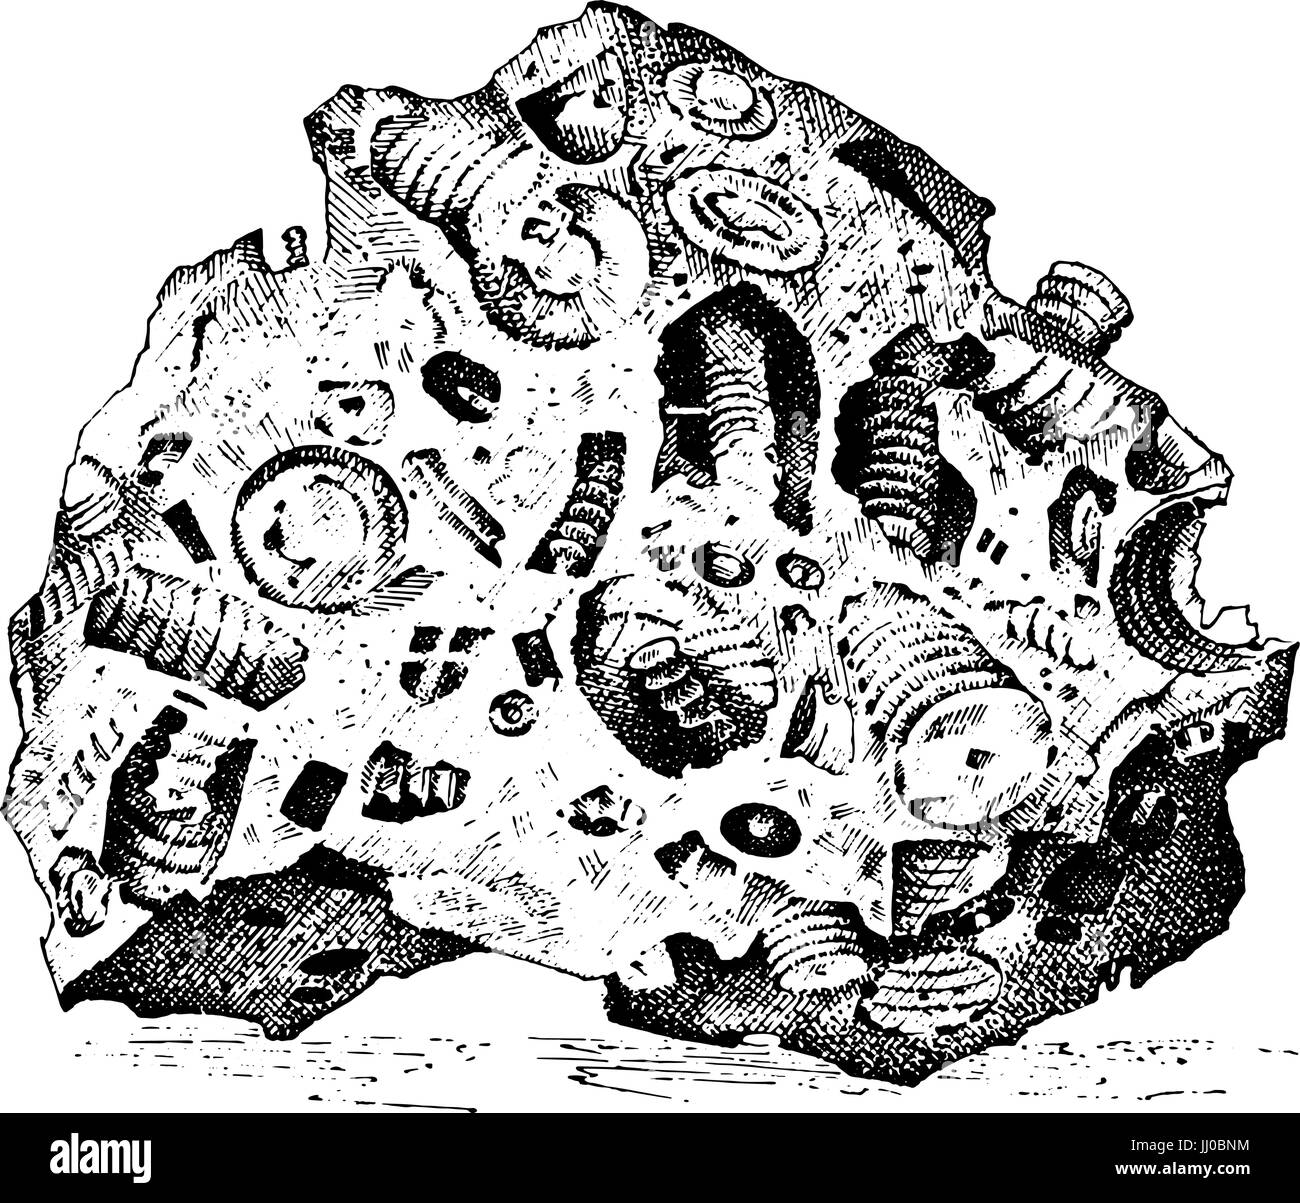 Fossilized plants, stones and minerals, crystals, prehistoric animals, archeology or paleontology. fragment fossils. engraved hand drawn in old sketch and vintage style. Stock Vector